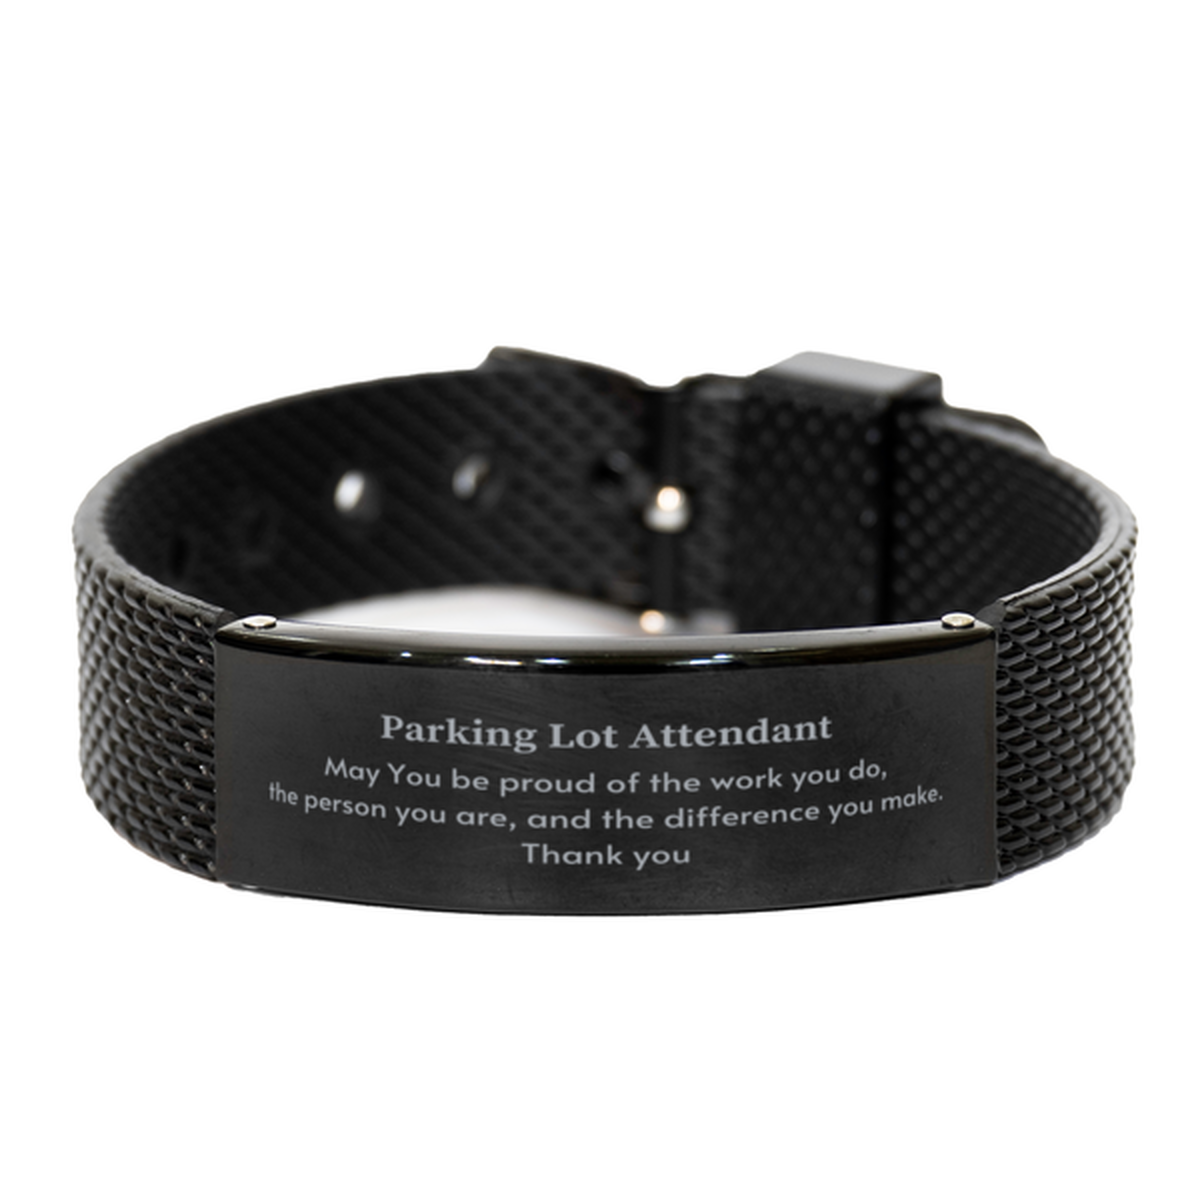 Heartwarming Black Shark Mesh Bracelet Retirement Coworkers Gifts for Parking Lot Attendant, Parking Lot Attendant May You be proud of the work you do, the person you are Gifts for Boss Men Women Friends